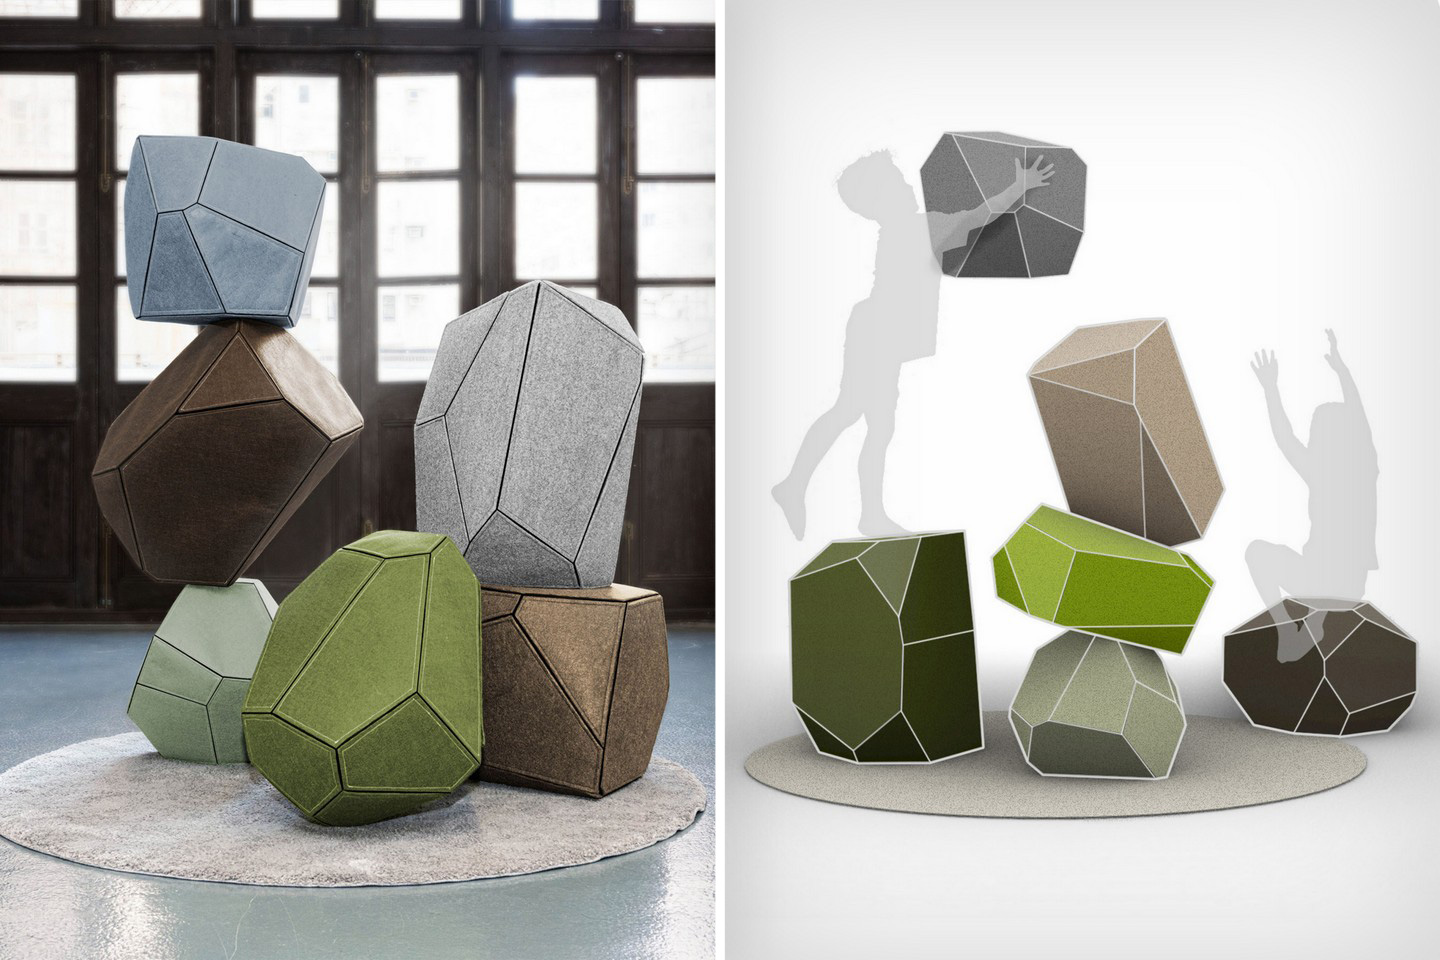 #Rock-inspired Ottoman stools were also designed to be stacked and played with